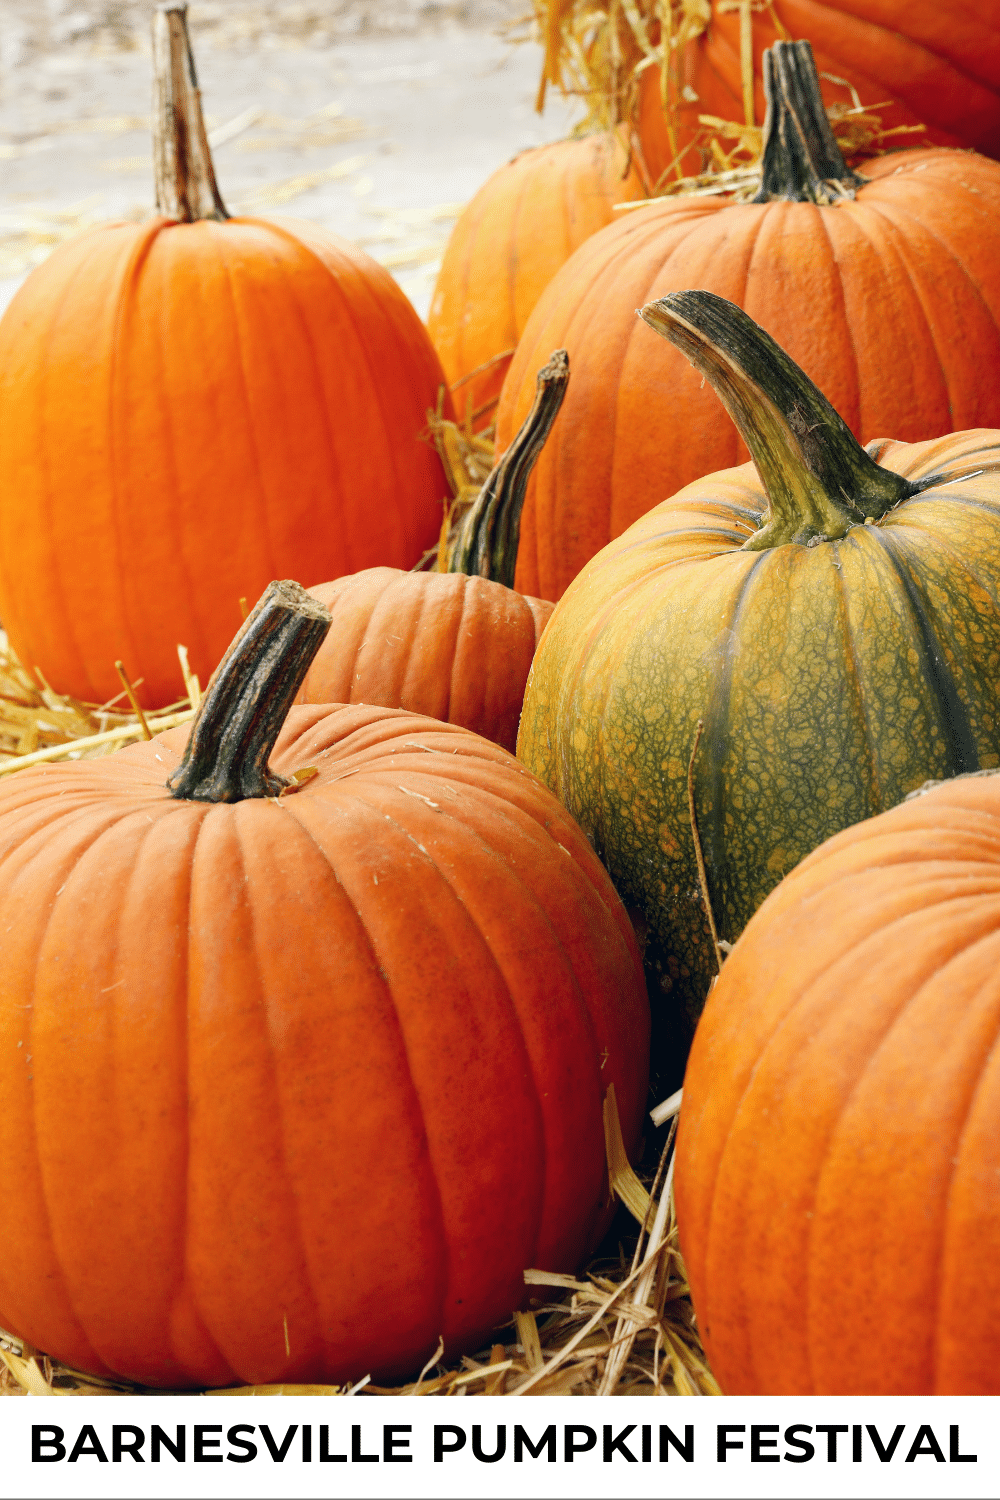 vertical image with some pumpkins and a white strip at the bottom with text Barnesville Pumpkin Festival Image via Canva Pro License